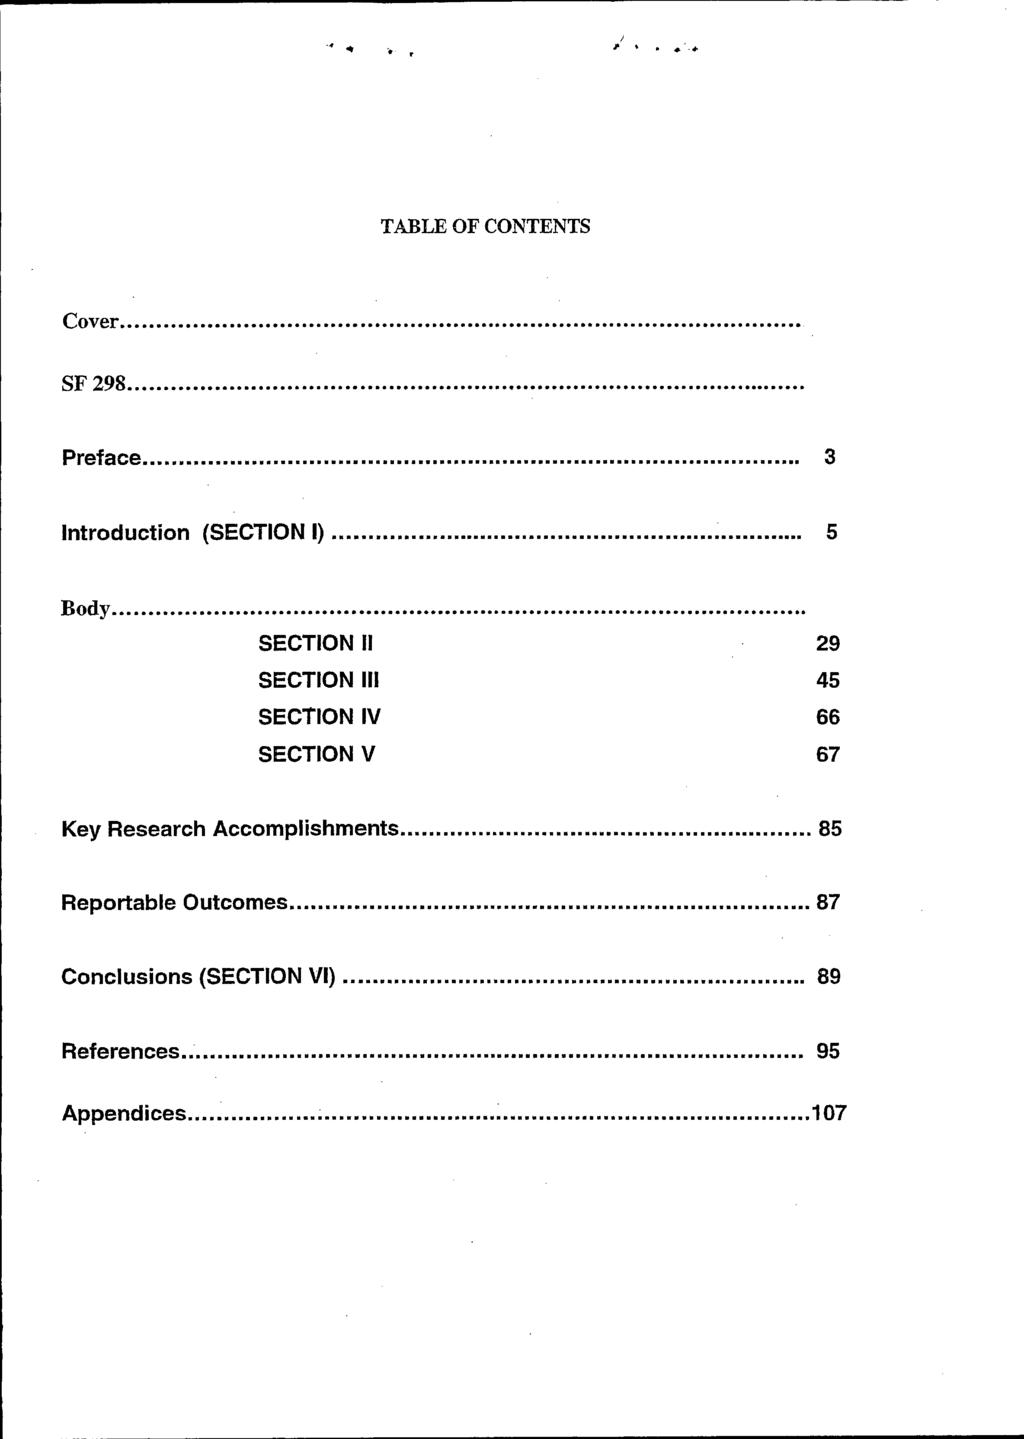 ., TABLE OF CONTENTS Cover SF298 Preface 3 Introduction (SECTION I) 5 Body SECTION II 29 SECTION III 45 SECTION IV 66